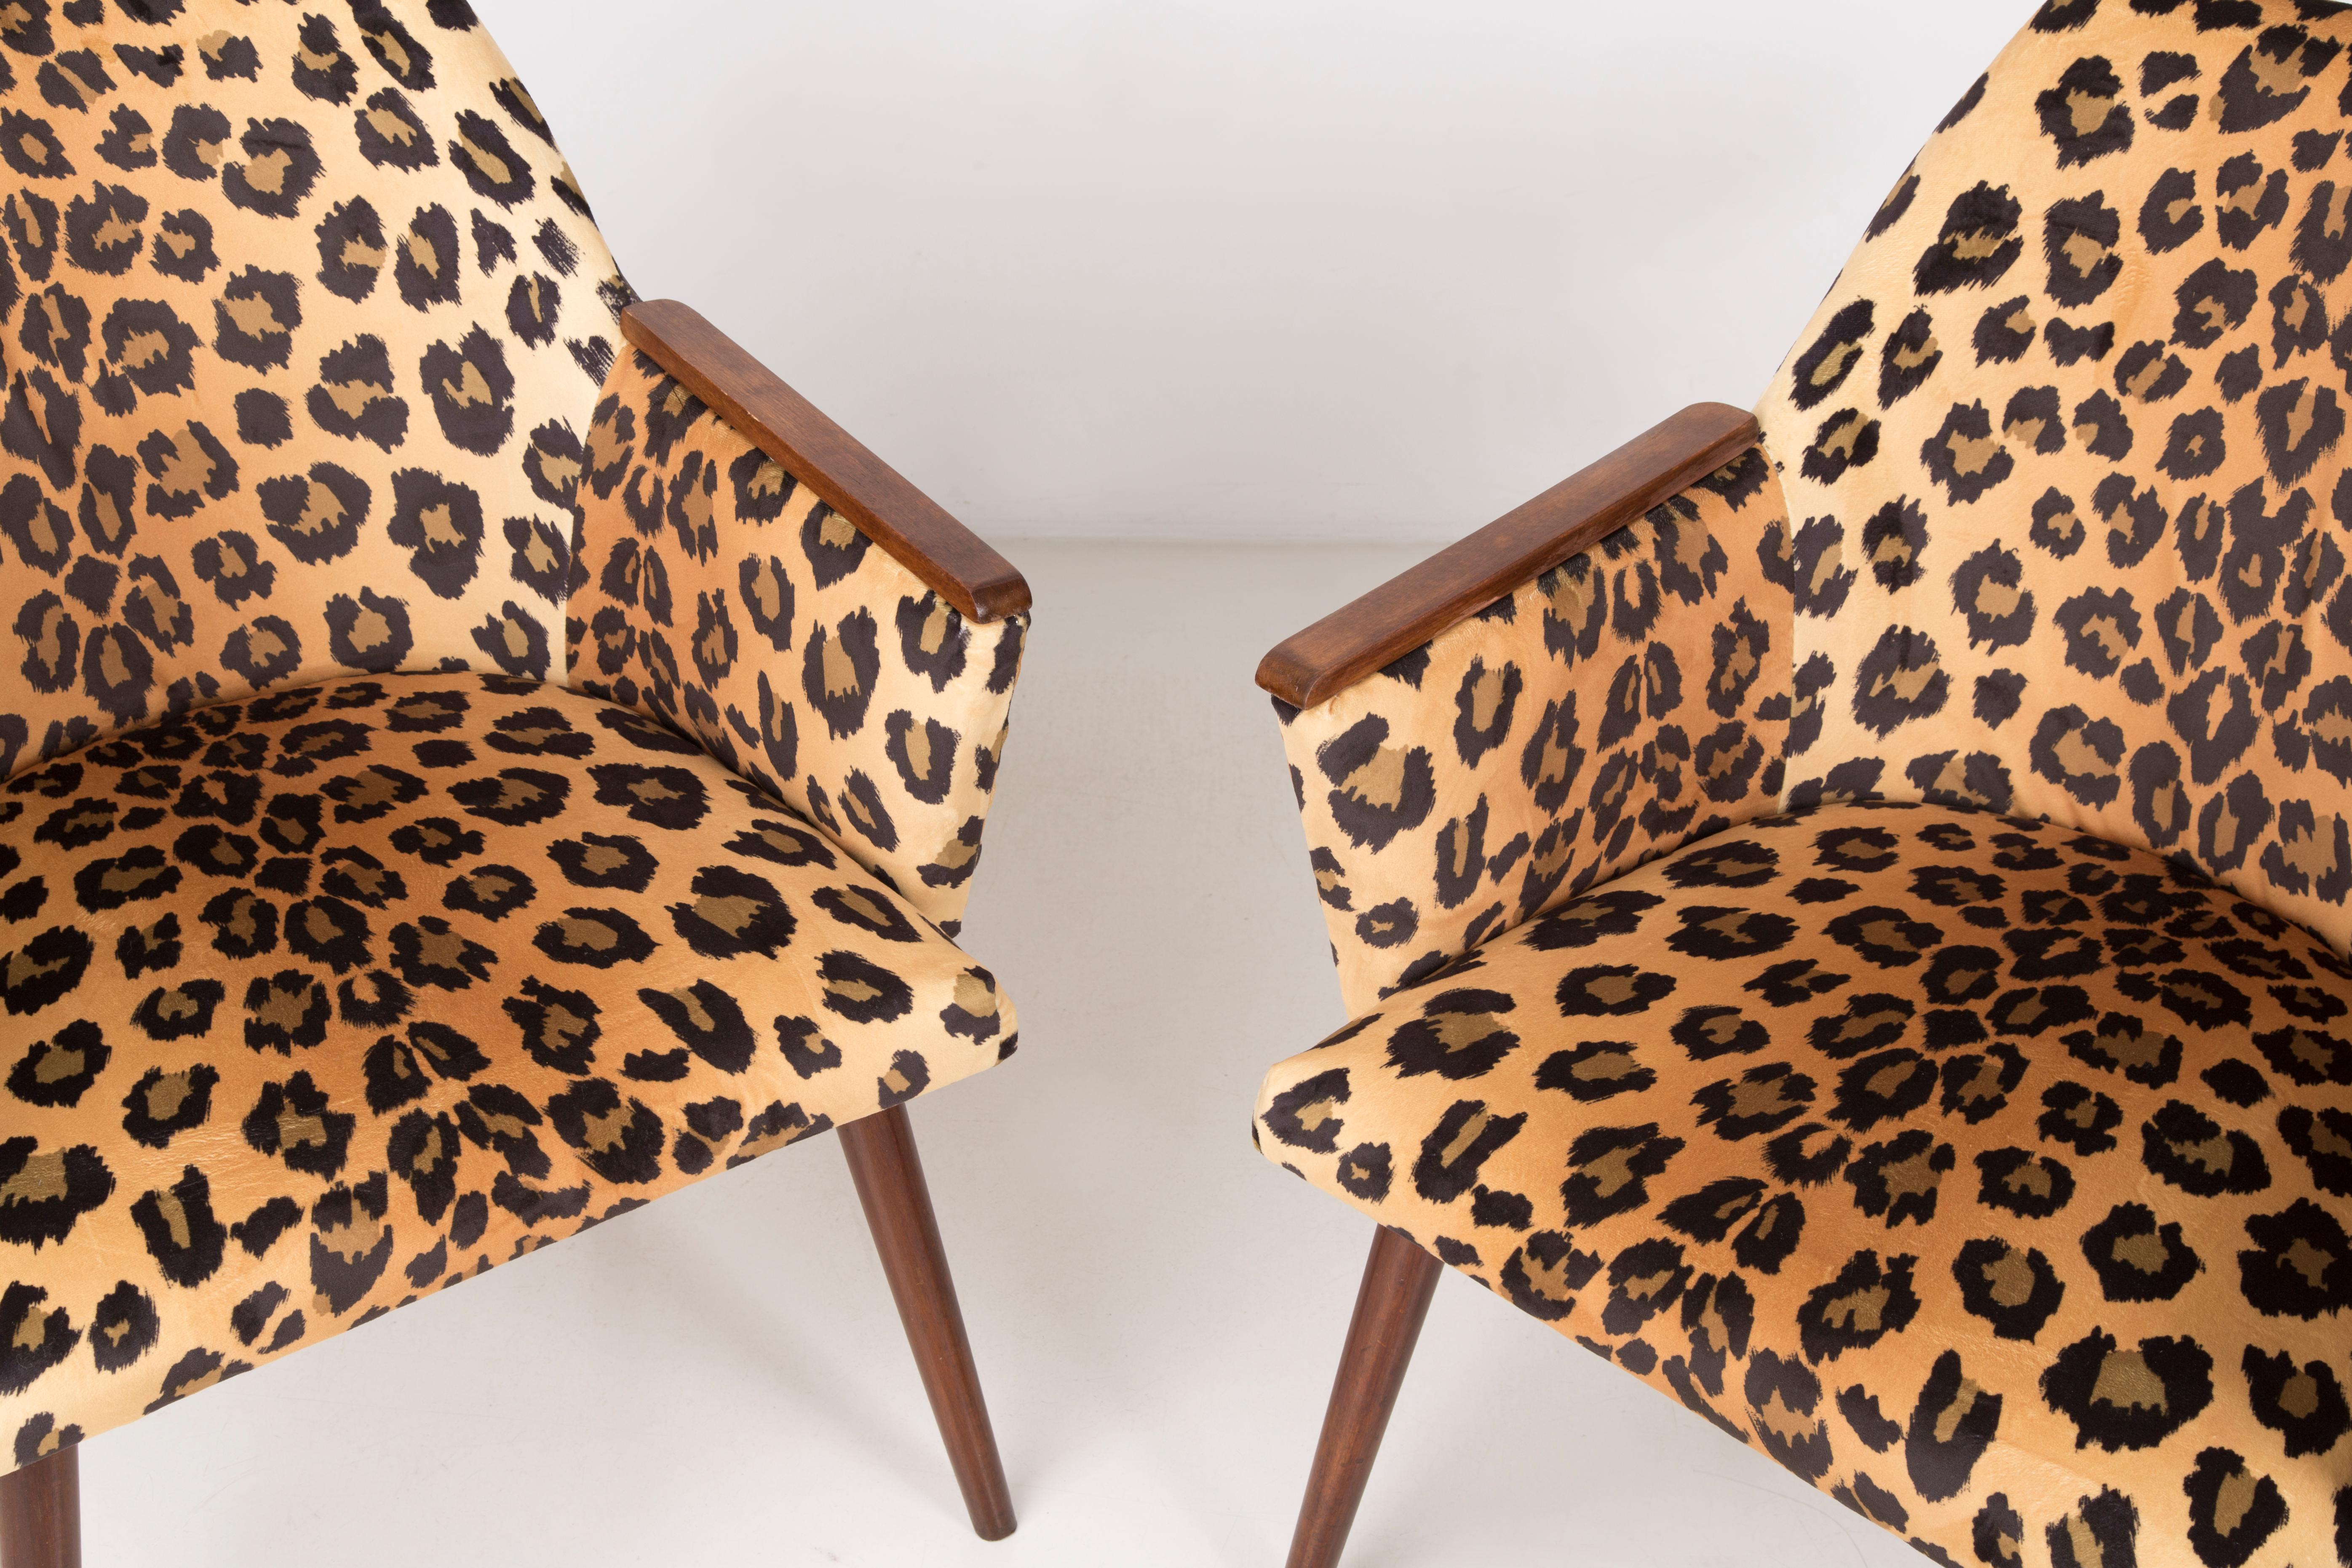 Polish Set of Two Mid-Century Modern Leopard Print Chairs, 1960s, Germany